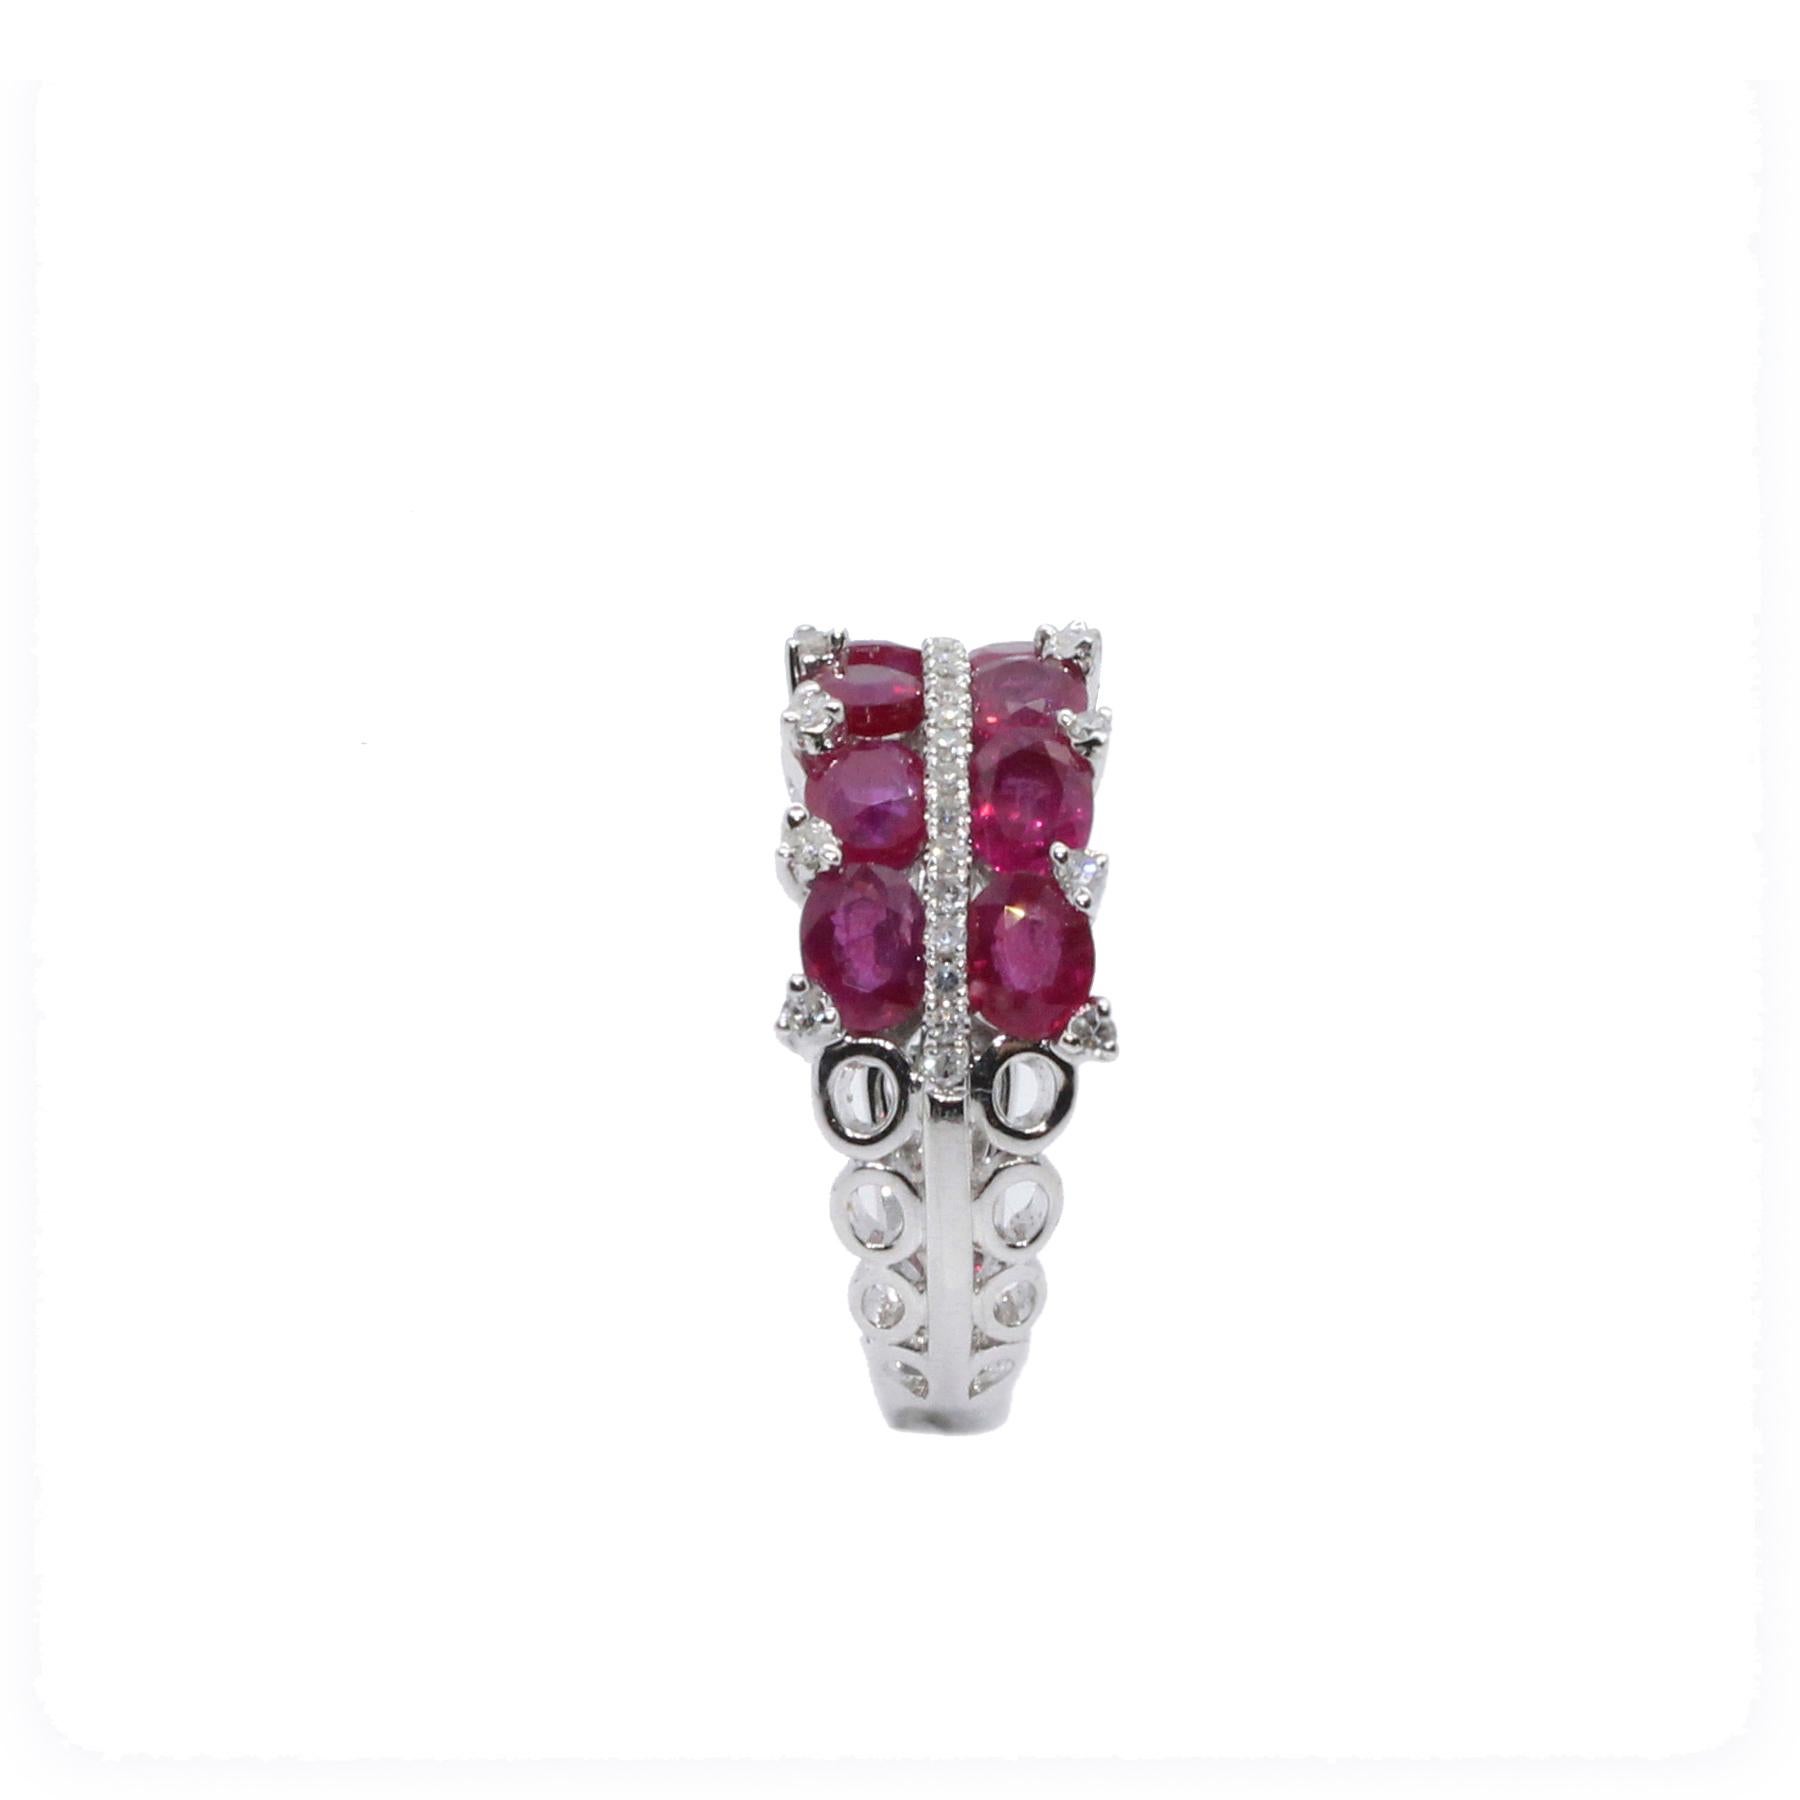 Oval Cut Ruby 3.5 Carat Diamond Ring For Sale